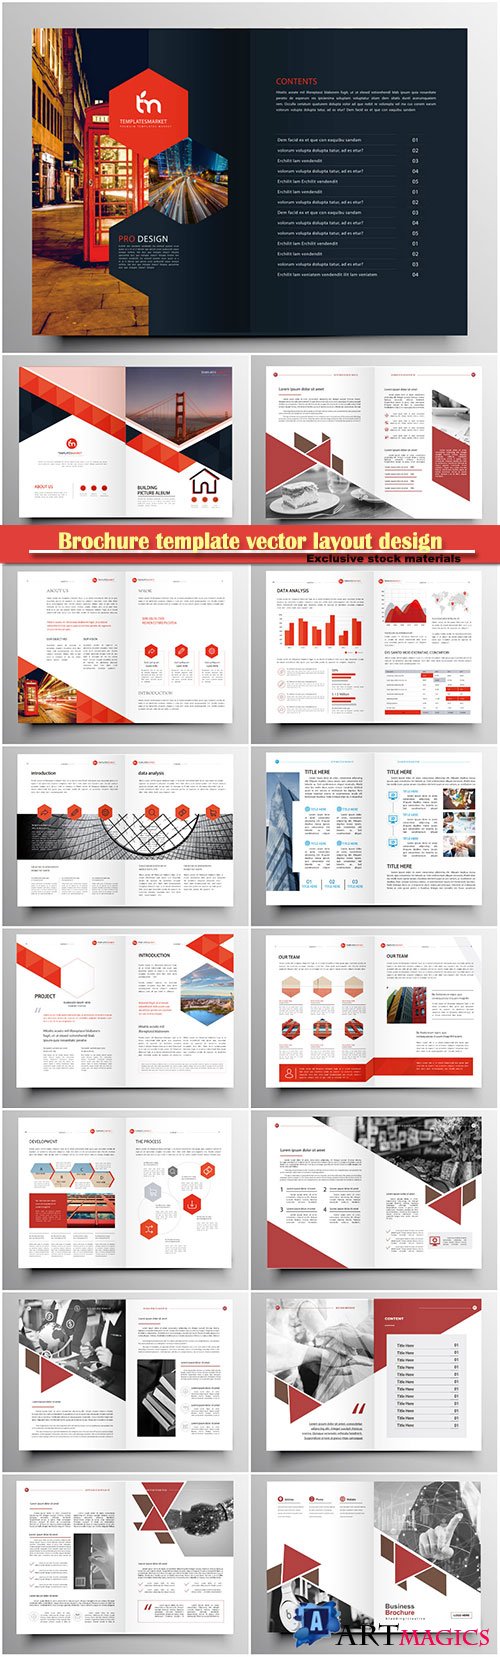 Brochure template vector layout design, corporate business annual report, magazine, flyer mockup # 130